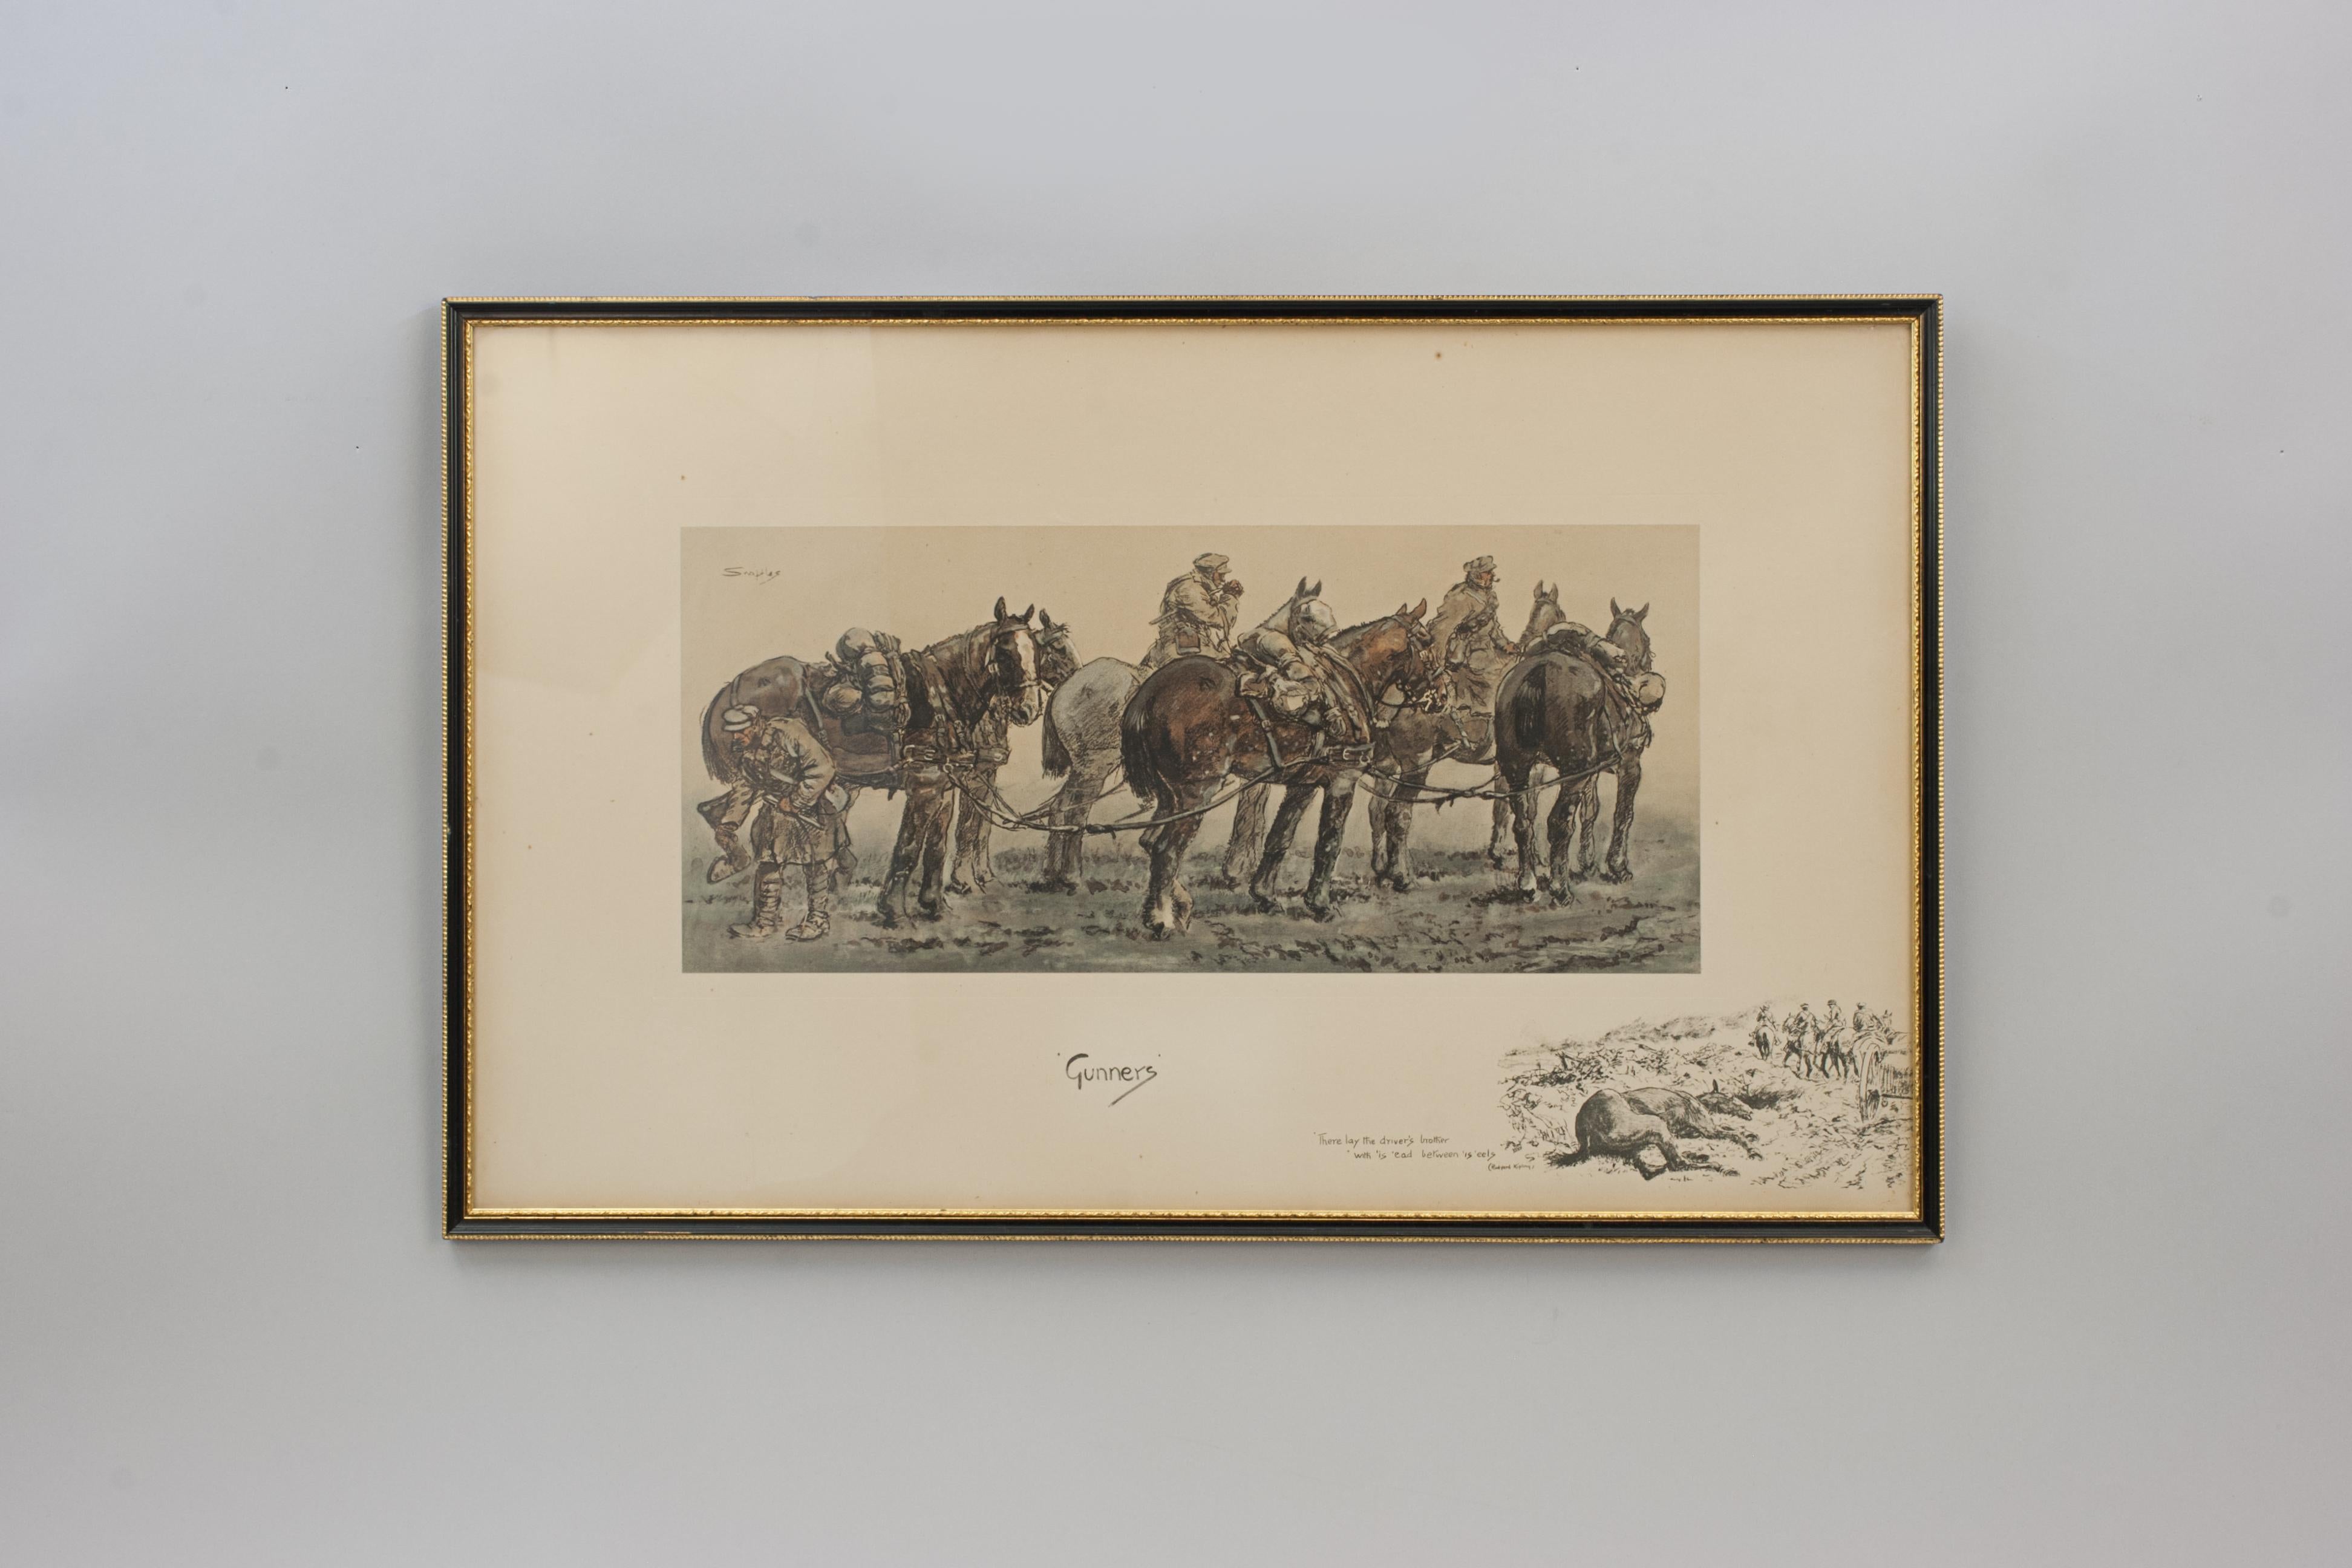 Snaffles WWI Military Print, Gunners.
A good Snaffles WWI military lithograph with hand finishing with the title 'Gunners'. The picture shows a team of six horses and three drivers, two smoking and one examining a horse's hoof. In the bottom margin